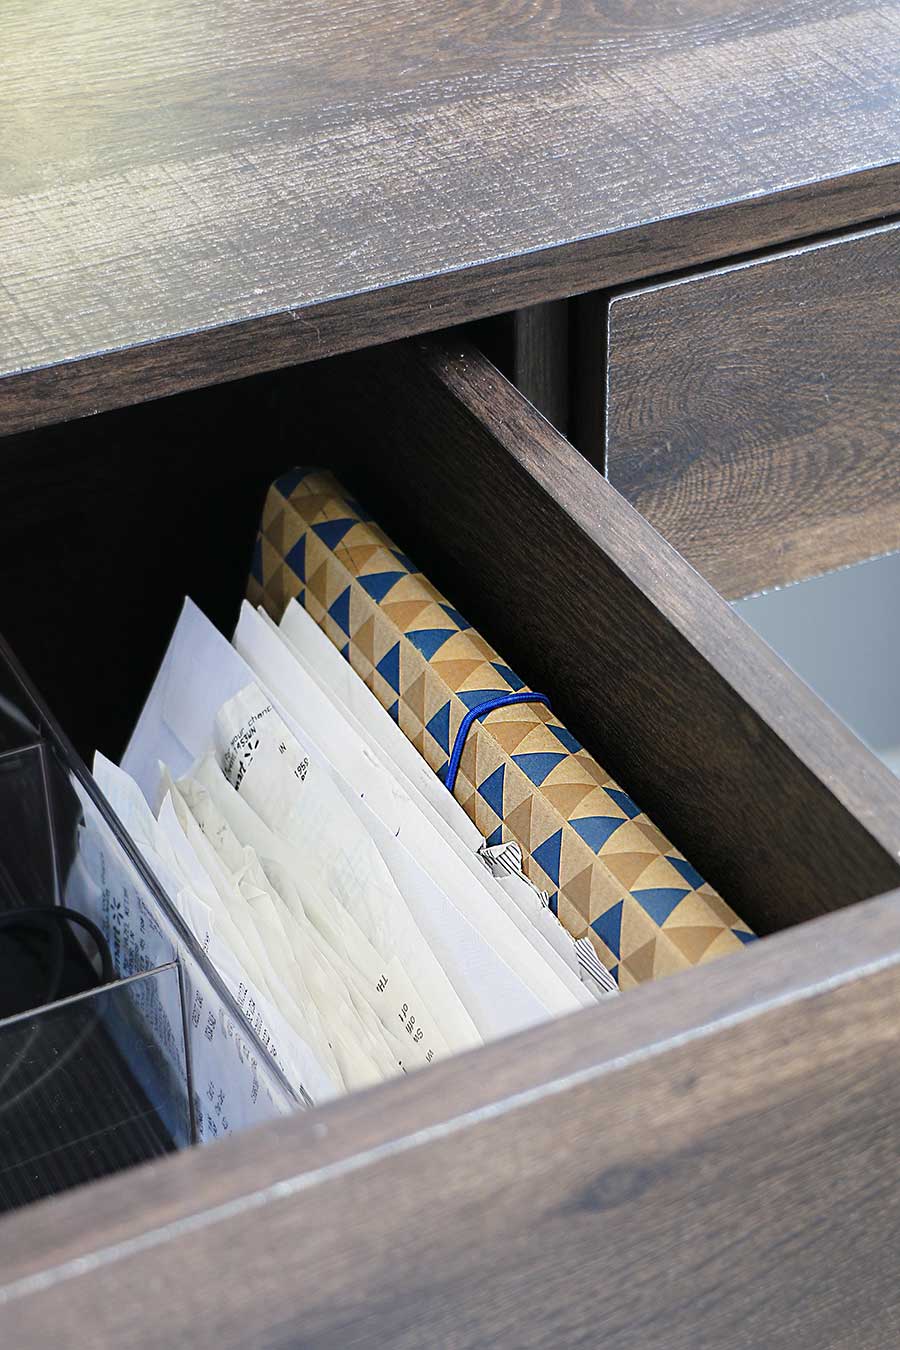 Drawer with receipts